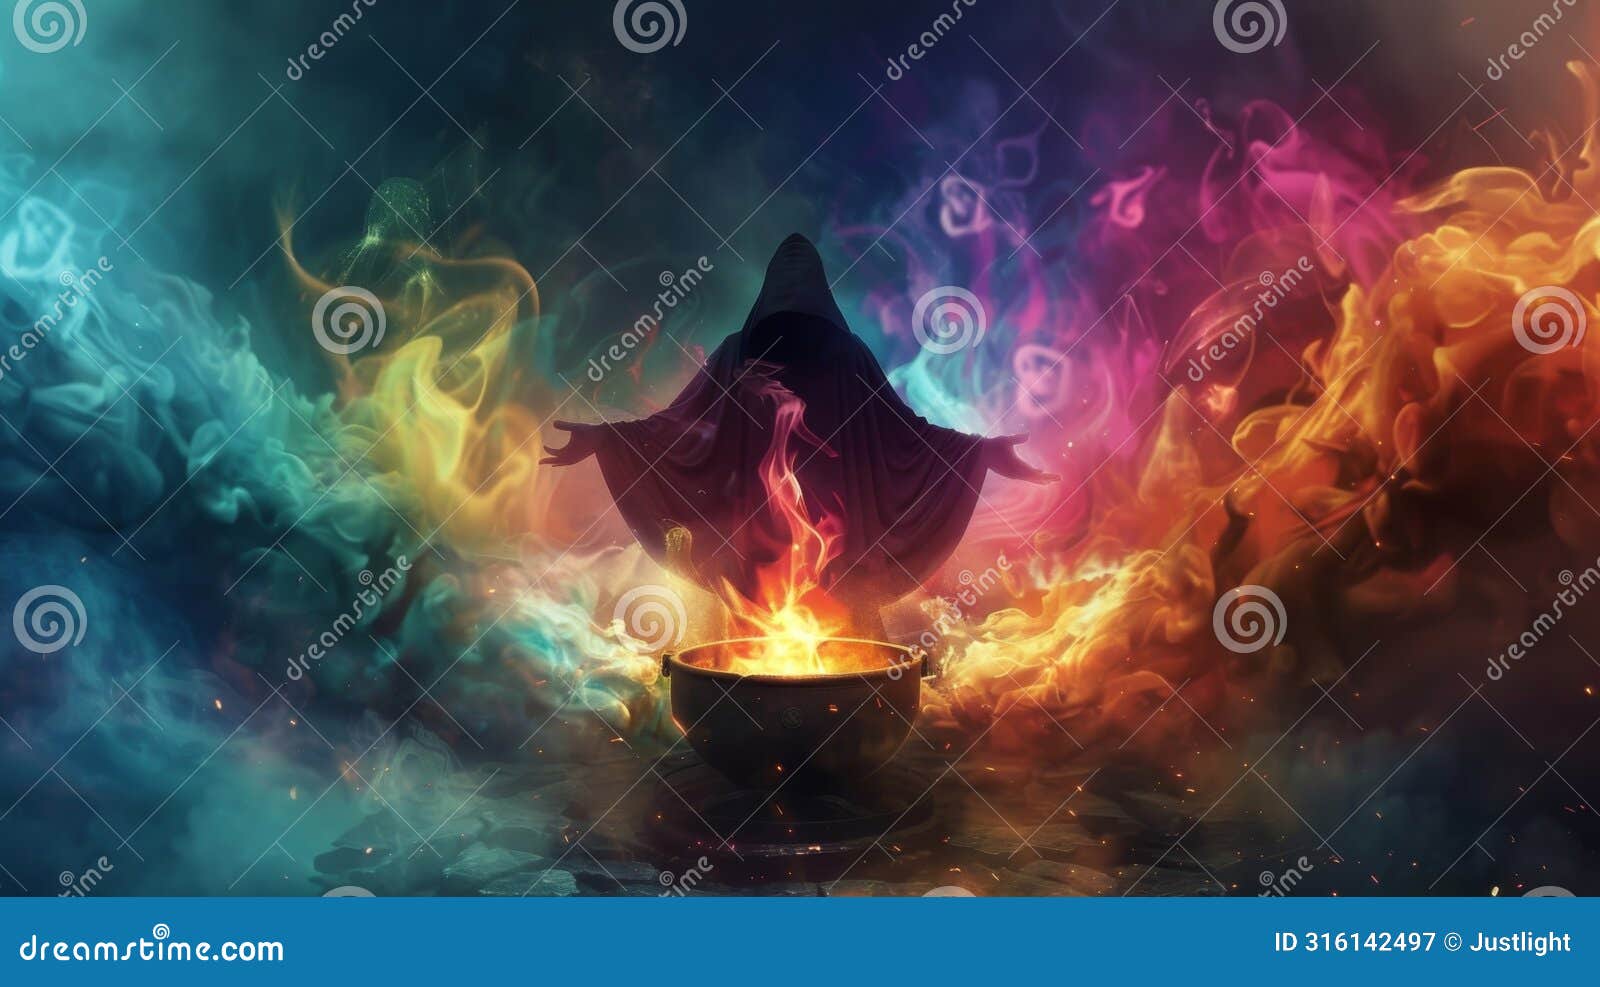 a dark ethereal figure looms over a mystical cauldron surrounded by swirling clouds of colorful smoke. as they chant